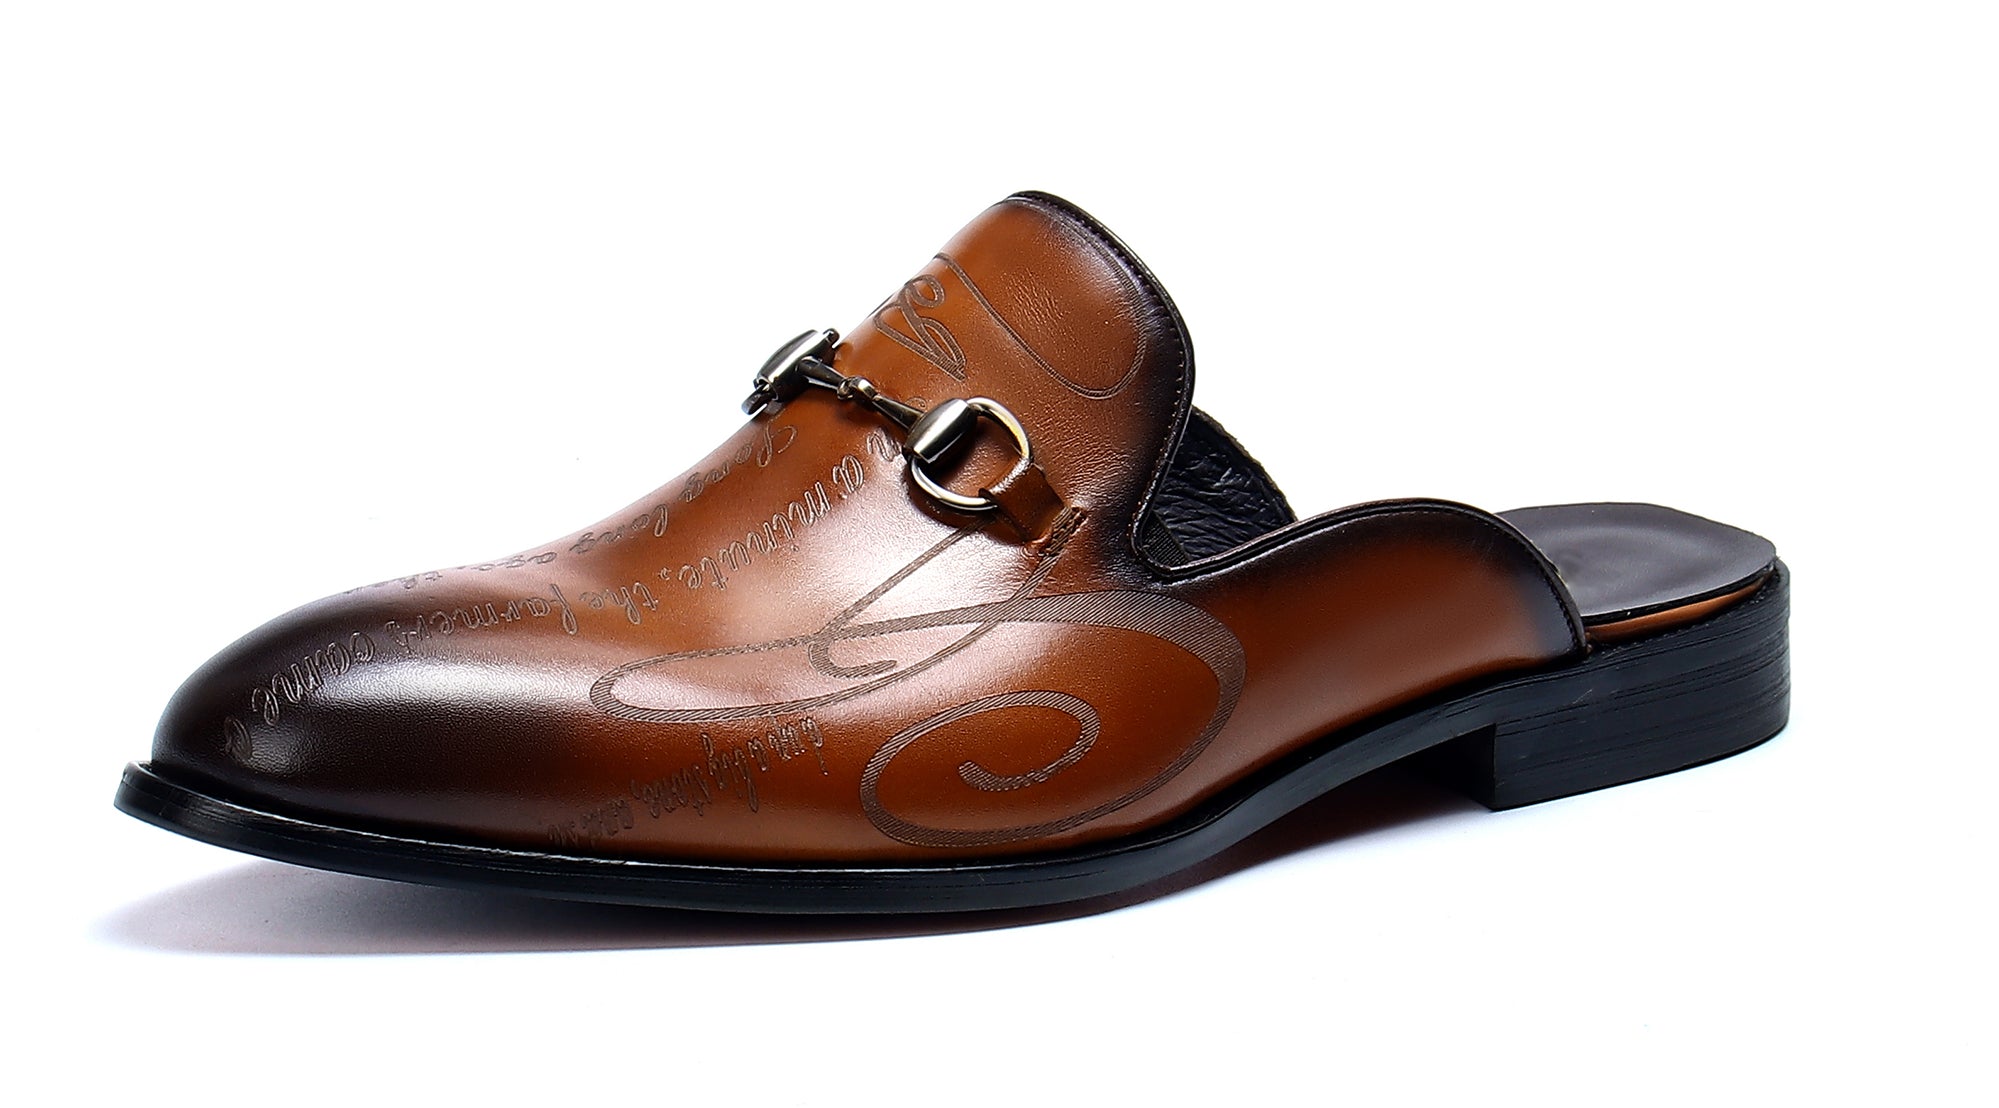 Men's Slip-On Buckle Leather Mules